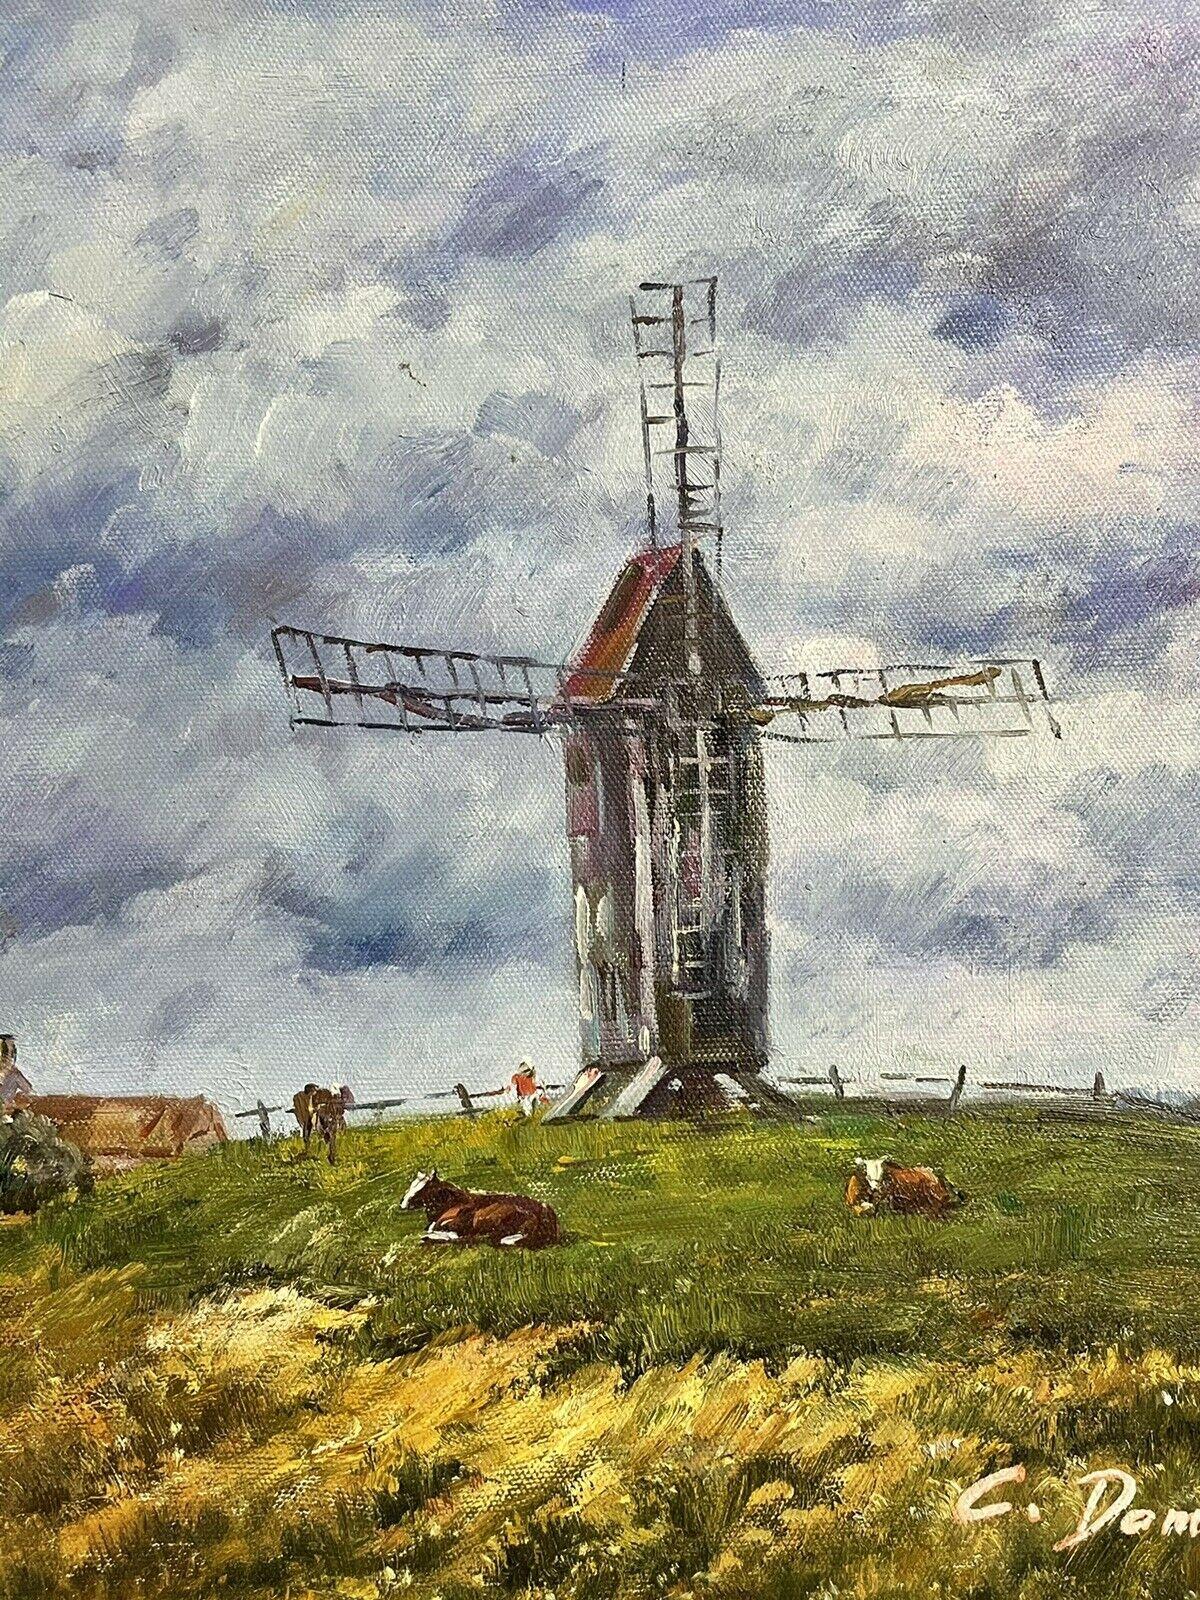 SIGNED FRENCH IMPRESSIONIST OIL PAINTING - WINDMILL IN RURAL FARM LANDSCAPE - Brown Landscape Painting by Unknown